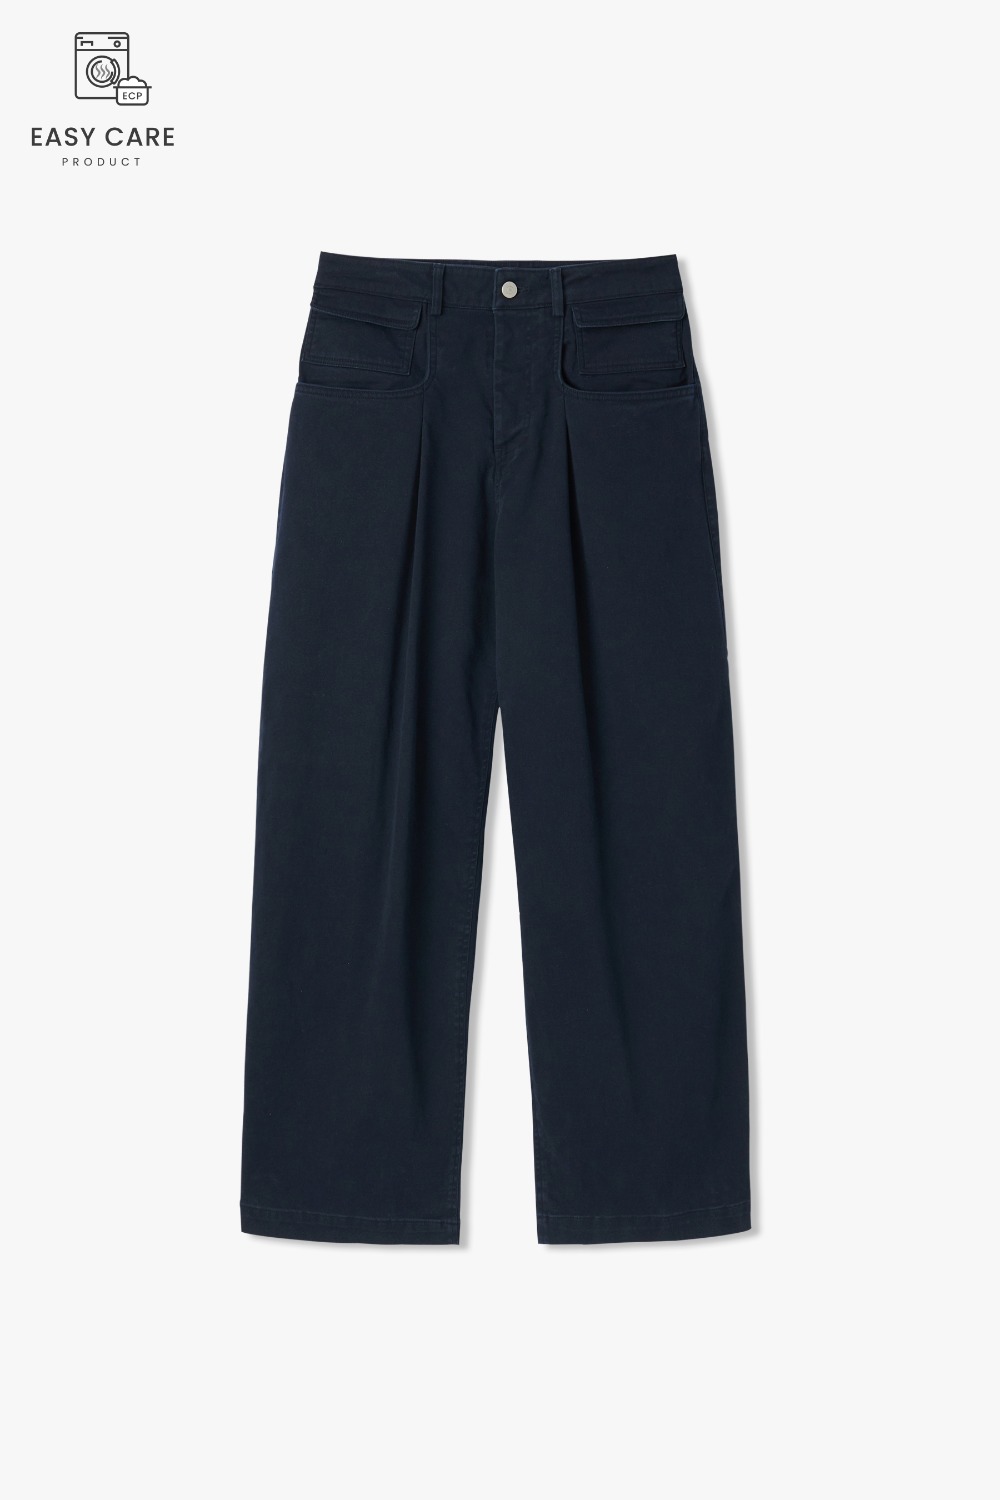 NAVY ROLL UP FLEXABLE WIDE CHINO PANTS (R.U.F WIDE CHINO PANTS)